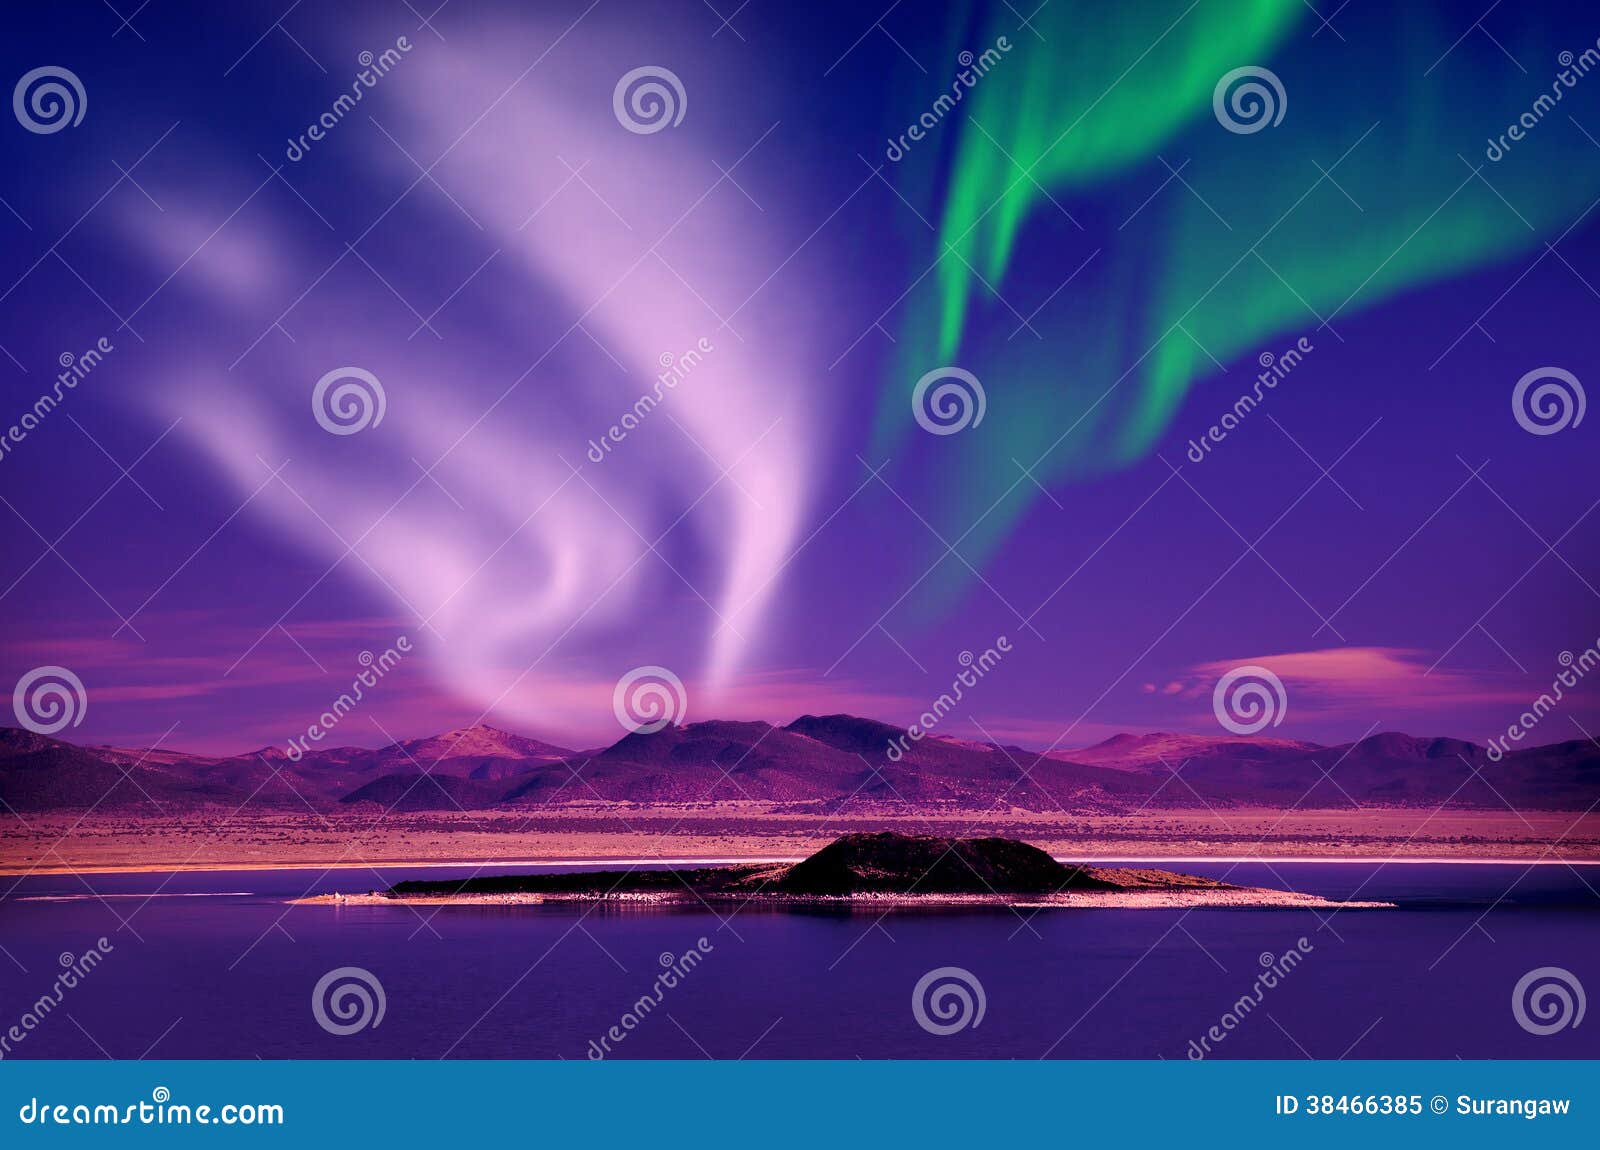 northern lights aurora borealis in the night sky over beautiful lake landscape